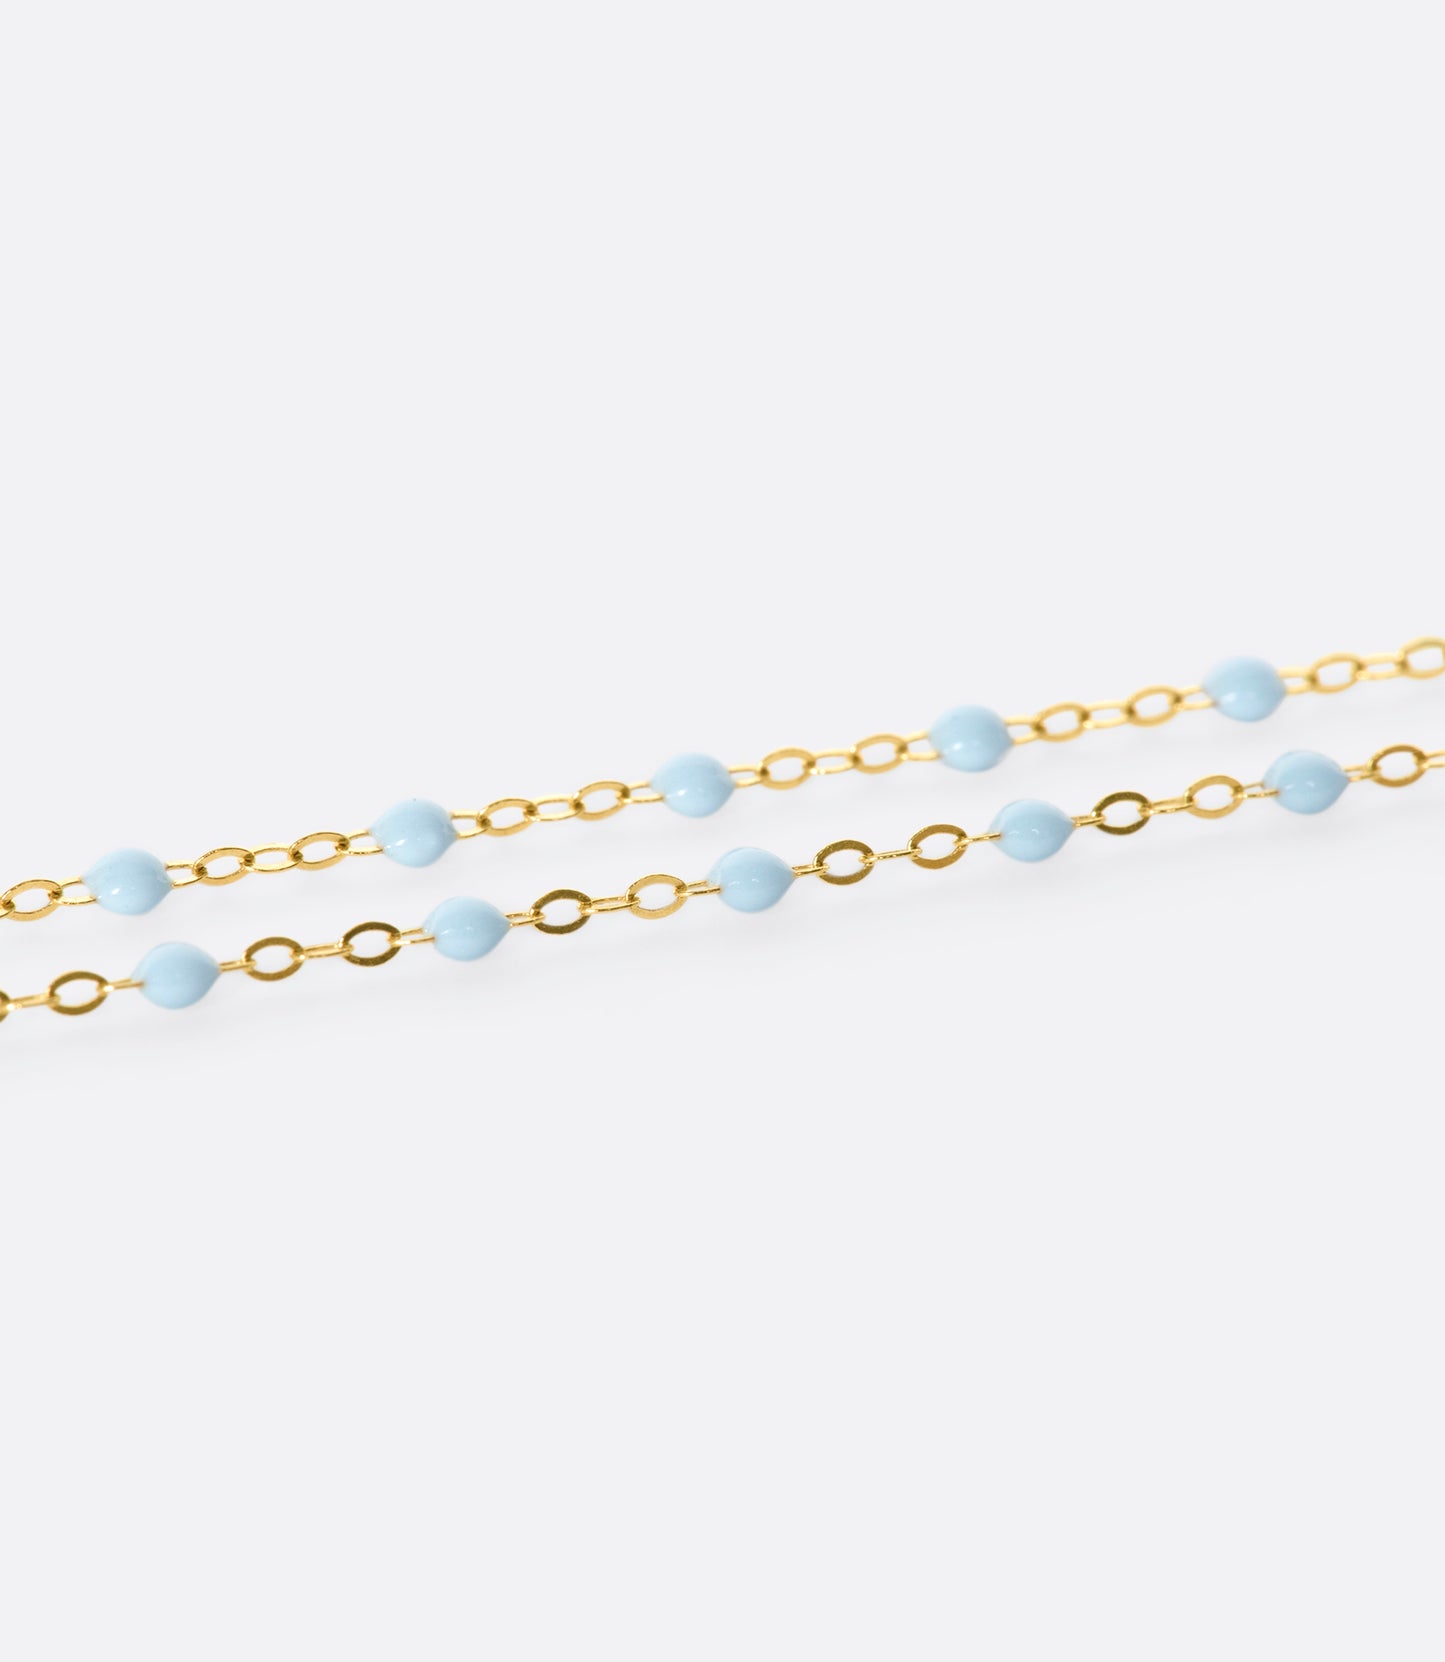 A thin yellow gold chain necklace with resin beads. Each necklace is hand dipped in melted resin to create the beaded effect. 